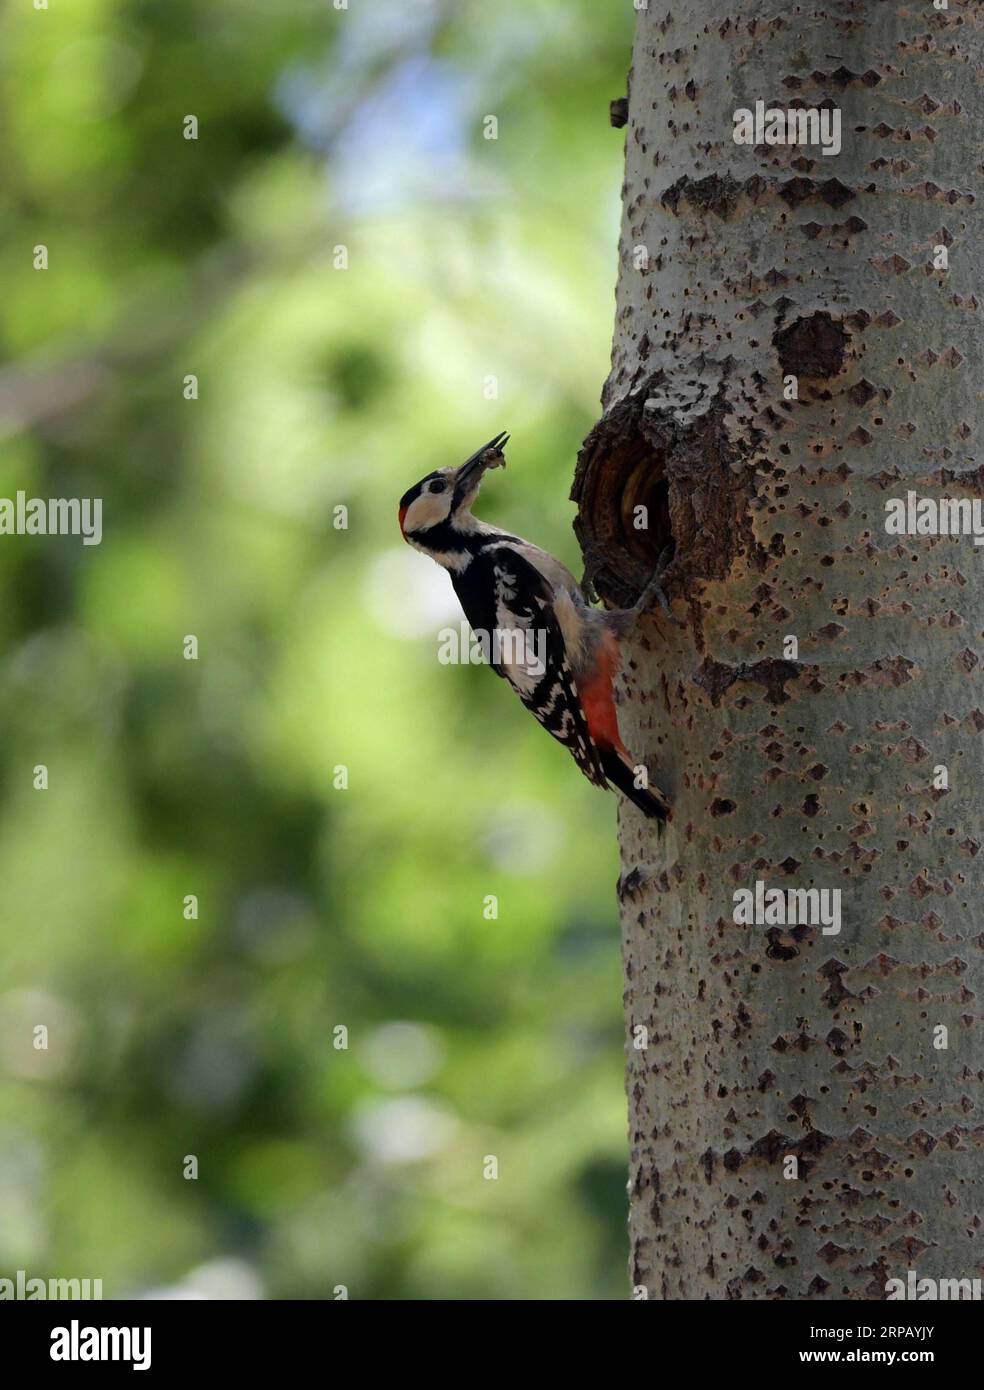 (190522) -- SHENYANG, May 22, 2019 (Xinhua) -- A great spotted woodpecker feeds its chick in a forest by the Hunhe River in Shenyang, northeast China s Liaoning Province, May 22, 2019. (Xinhua/Yang Qing) CHINA-LIAONING-SHENYANG-WOODPECKER (CN) PUBLICATIONxNOTxINxCHN Stock Photo